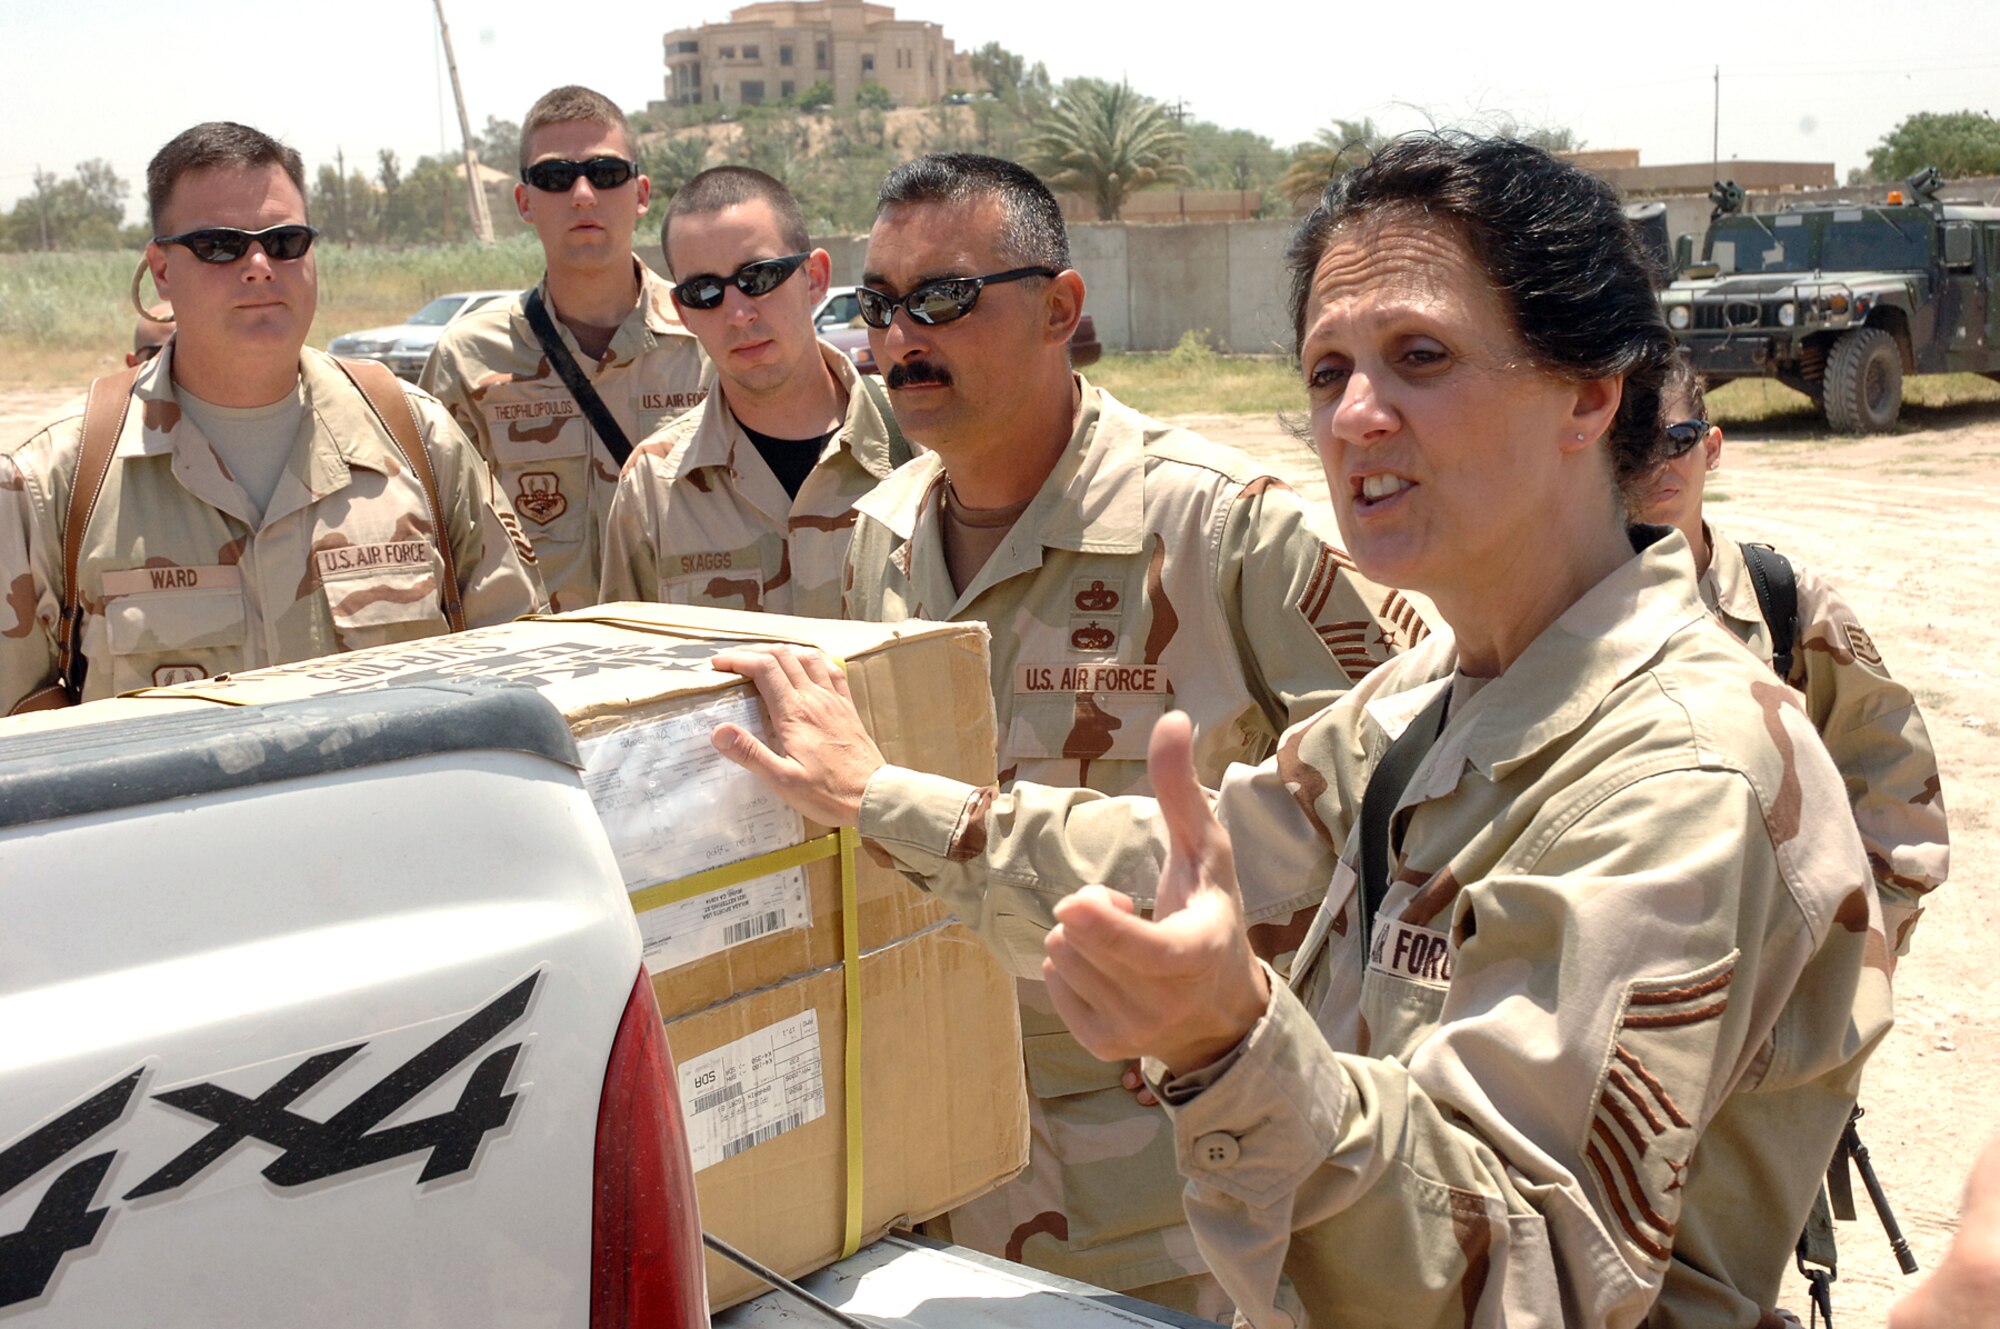 Senior Master Sgt. Jennifer Taglieri briefs the plan of the day to other Airmen from Sather Air Base, Iraq, before entering the Army's Civil Military Operations Center at the Radwinya Palace Complex. Three days a week, Airmen from Sather volunteer at the facility, providing limited medical care and other needs to local Iraqi families. Sergeant Taglieri is deployed from Lackland Air Force Base, Texas. (U.S. Air Force photo/Staff Sgt. Bryan Bouchard)